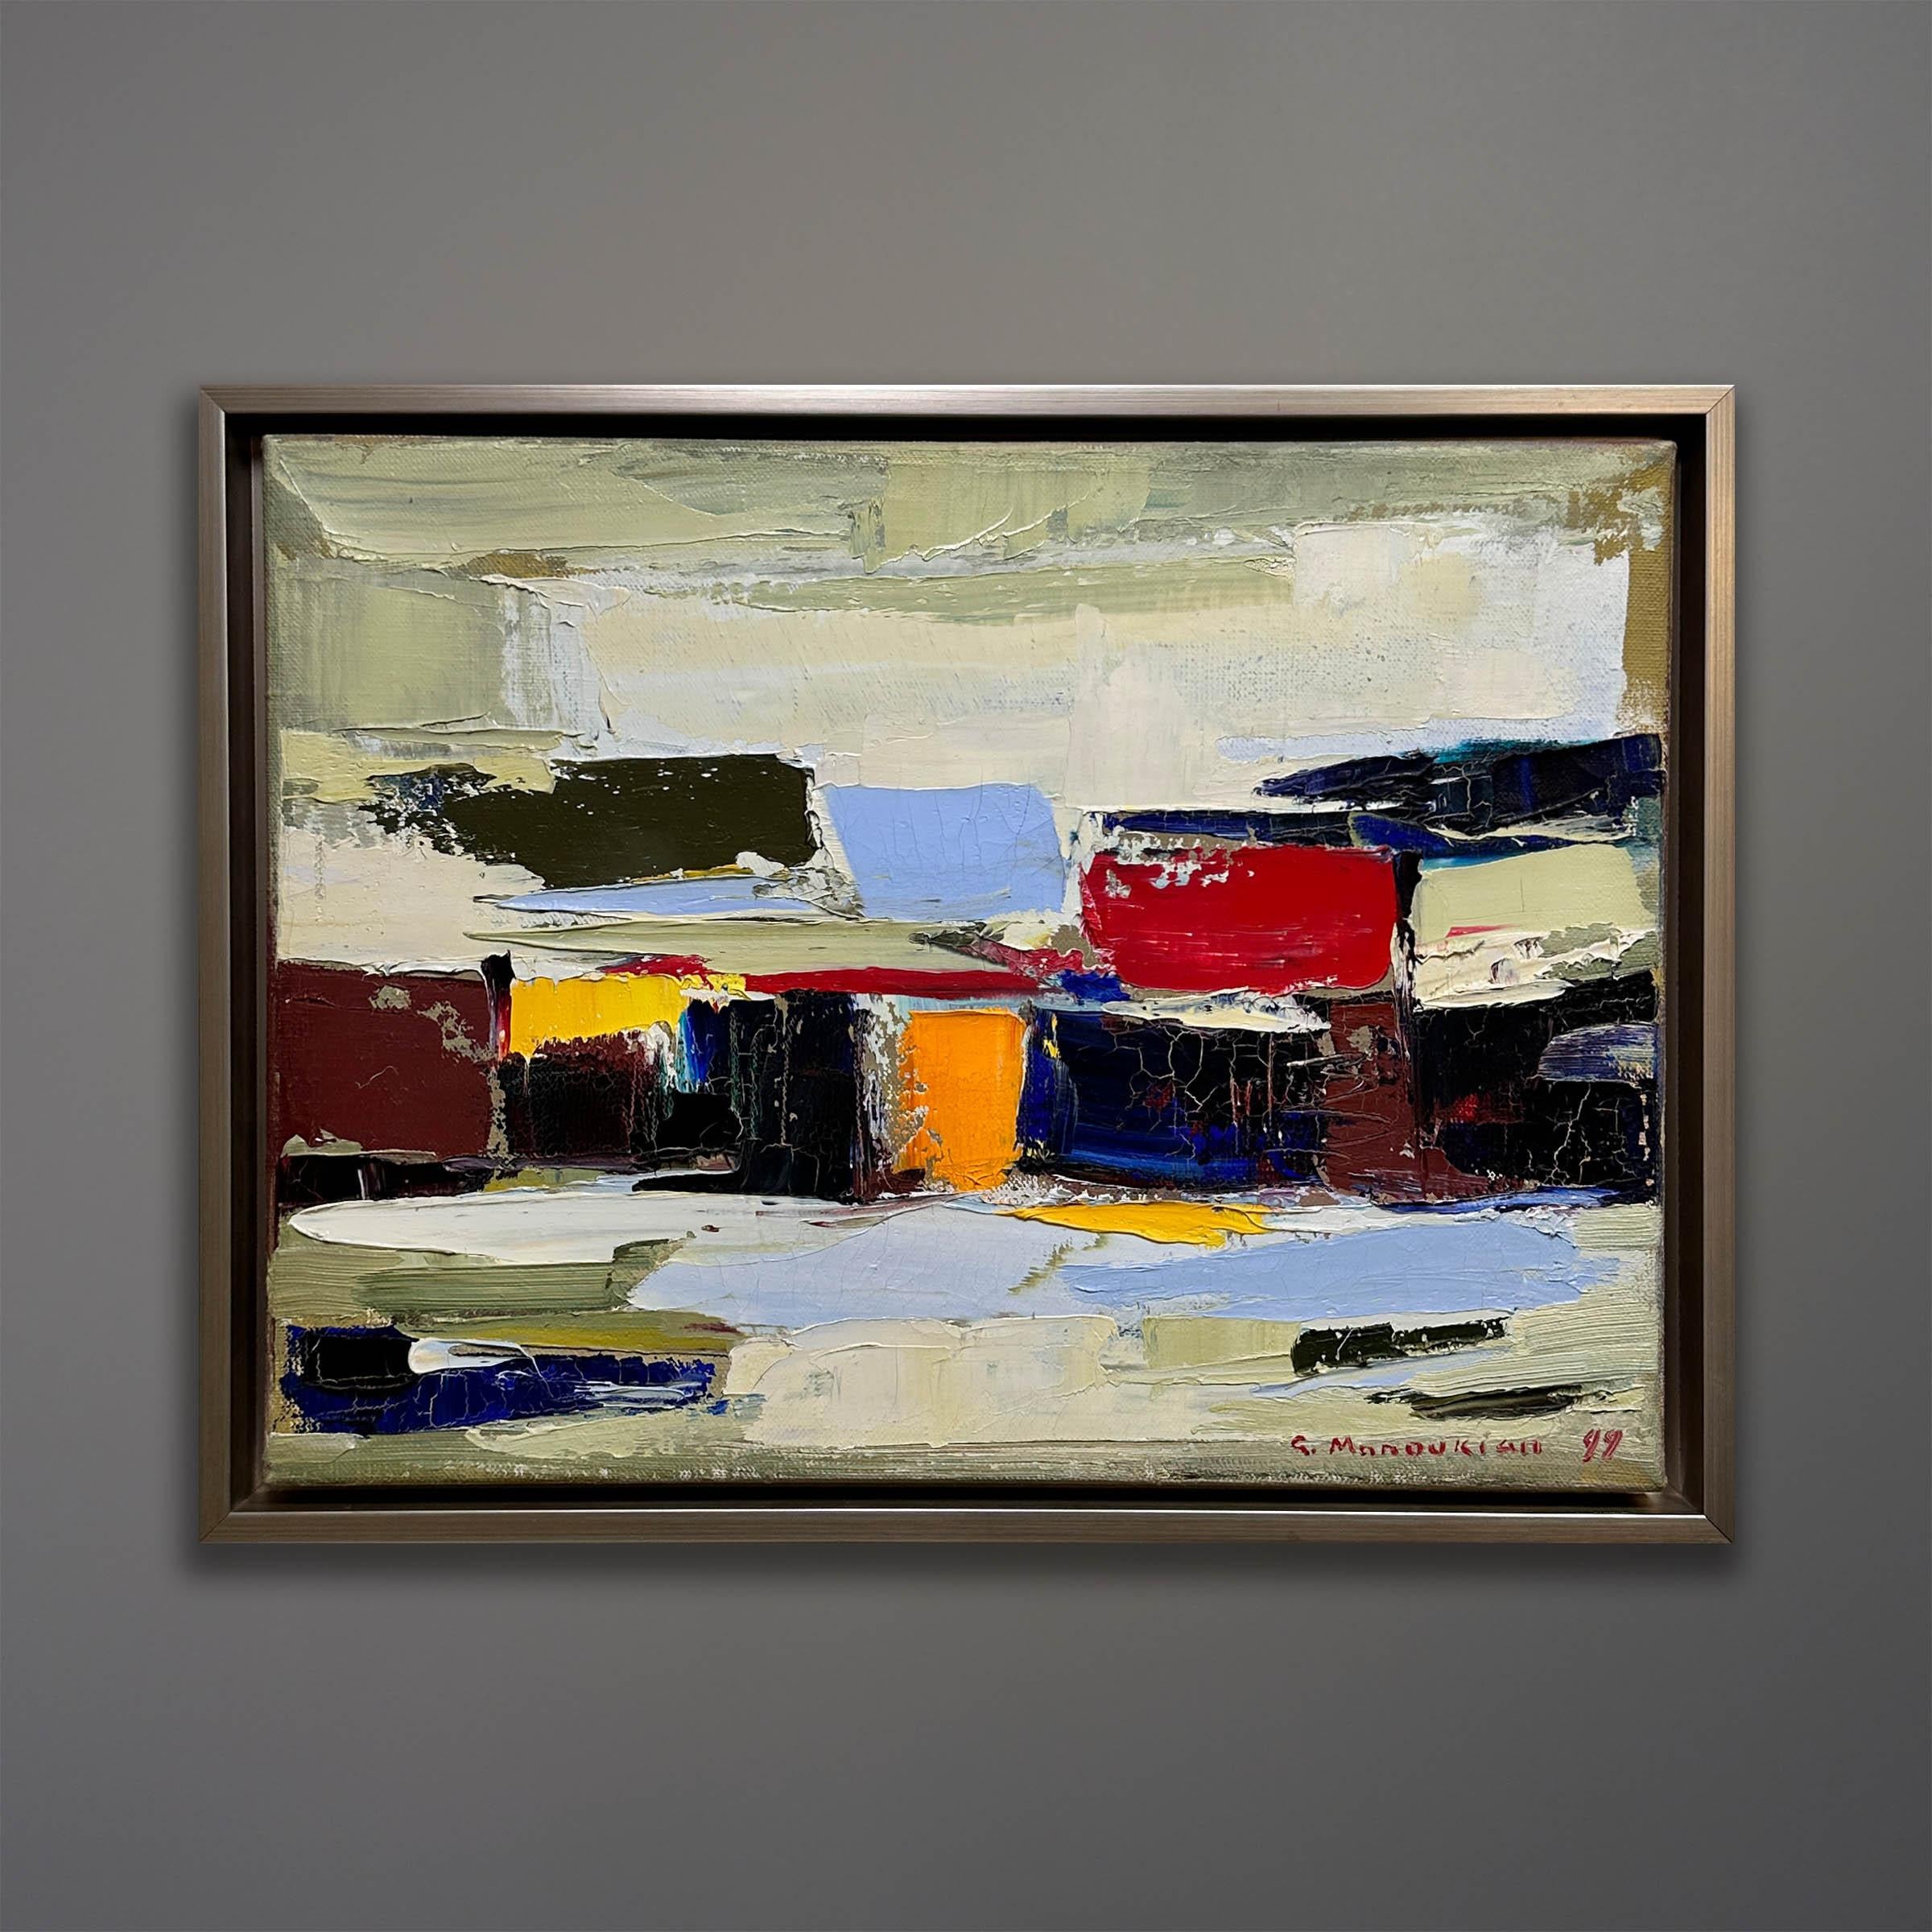 Offered here is an original abstract oil painting on linen signed by Gagik Manoukian and dated 1999. It measures 17×13 inches as float framed in warm silver gilt over wood. This painting is reminiscent of Hans Hoffman and Nicolas de Staël. Gagik